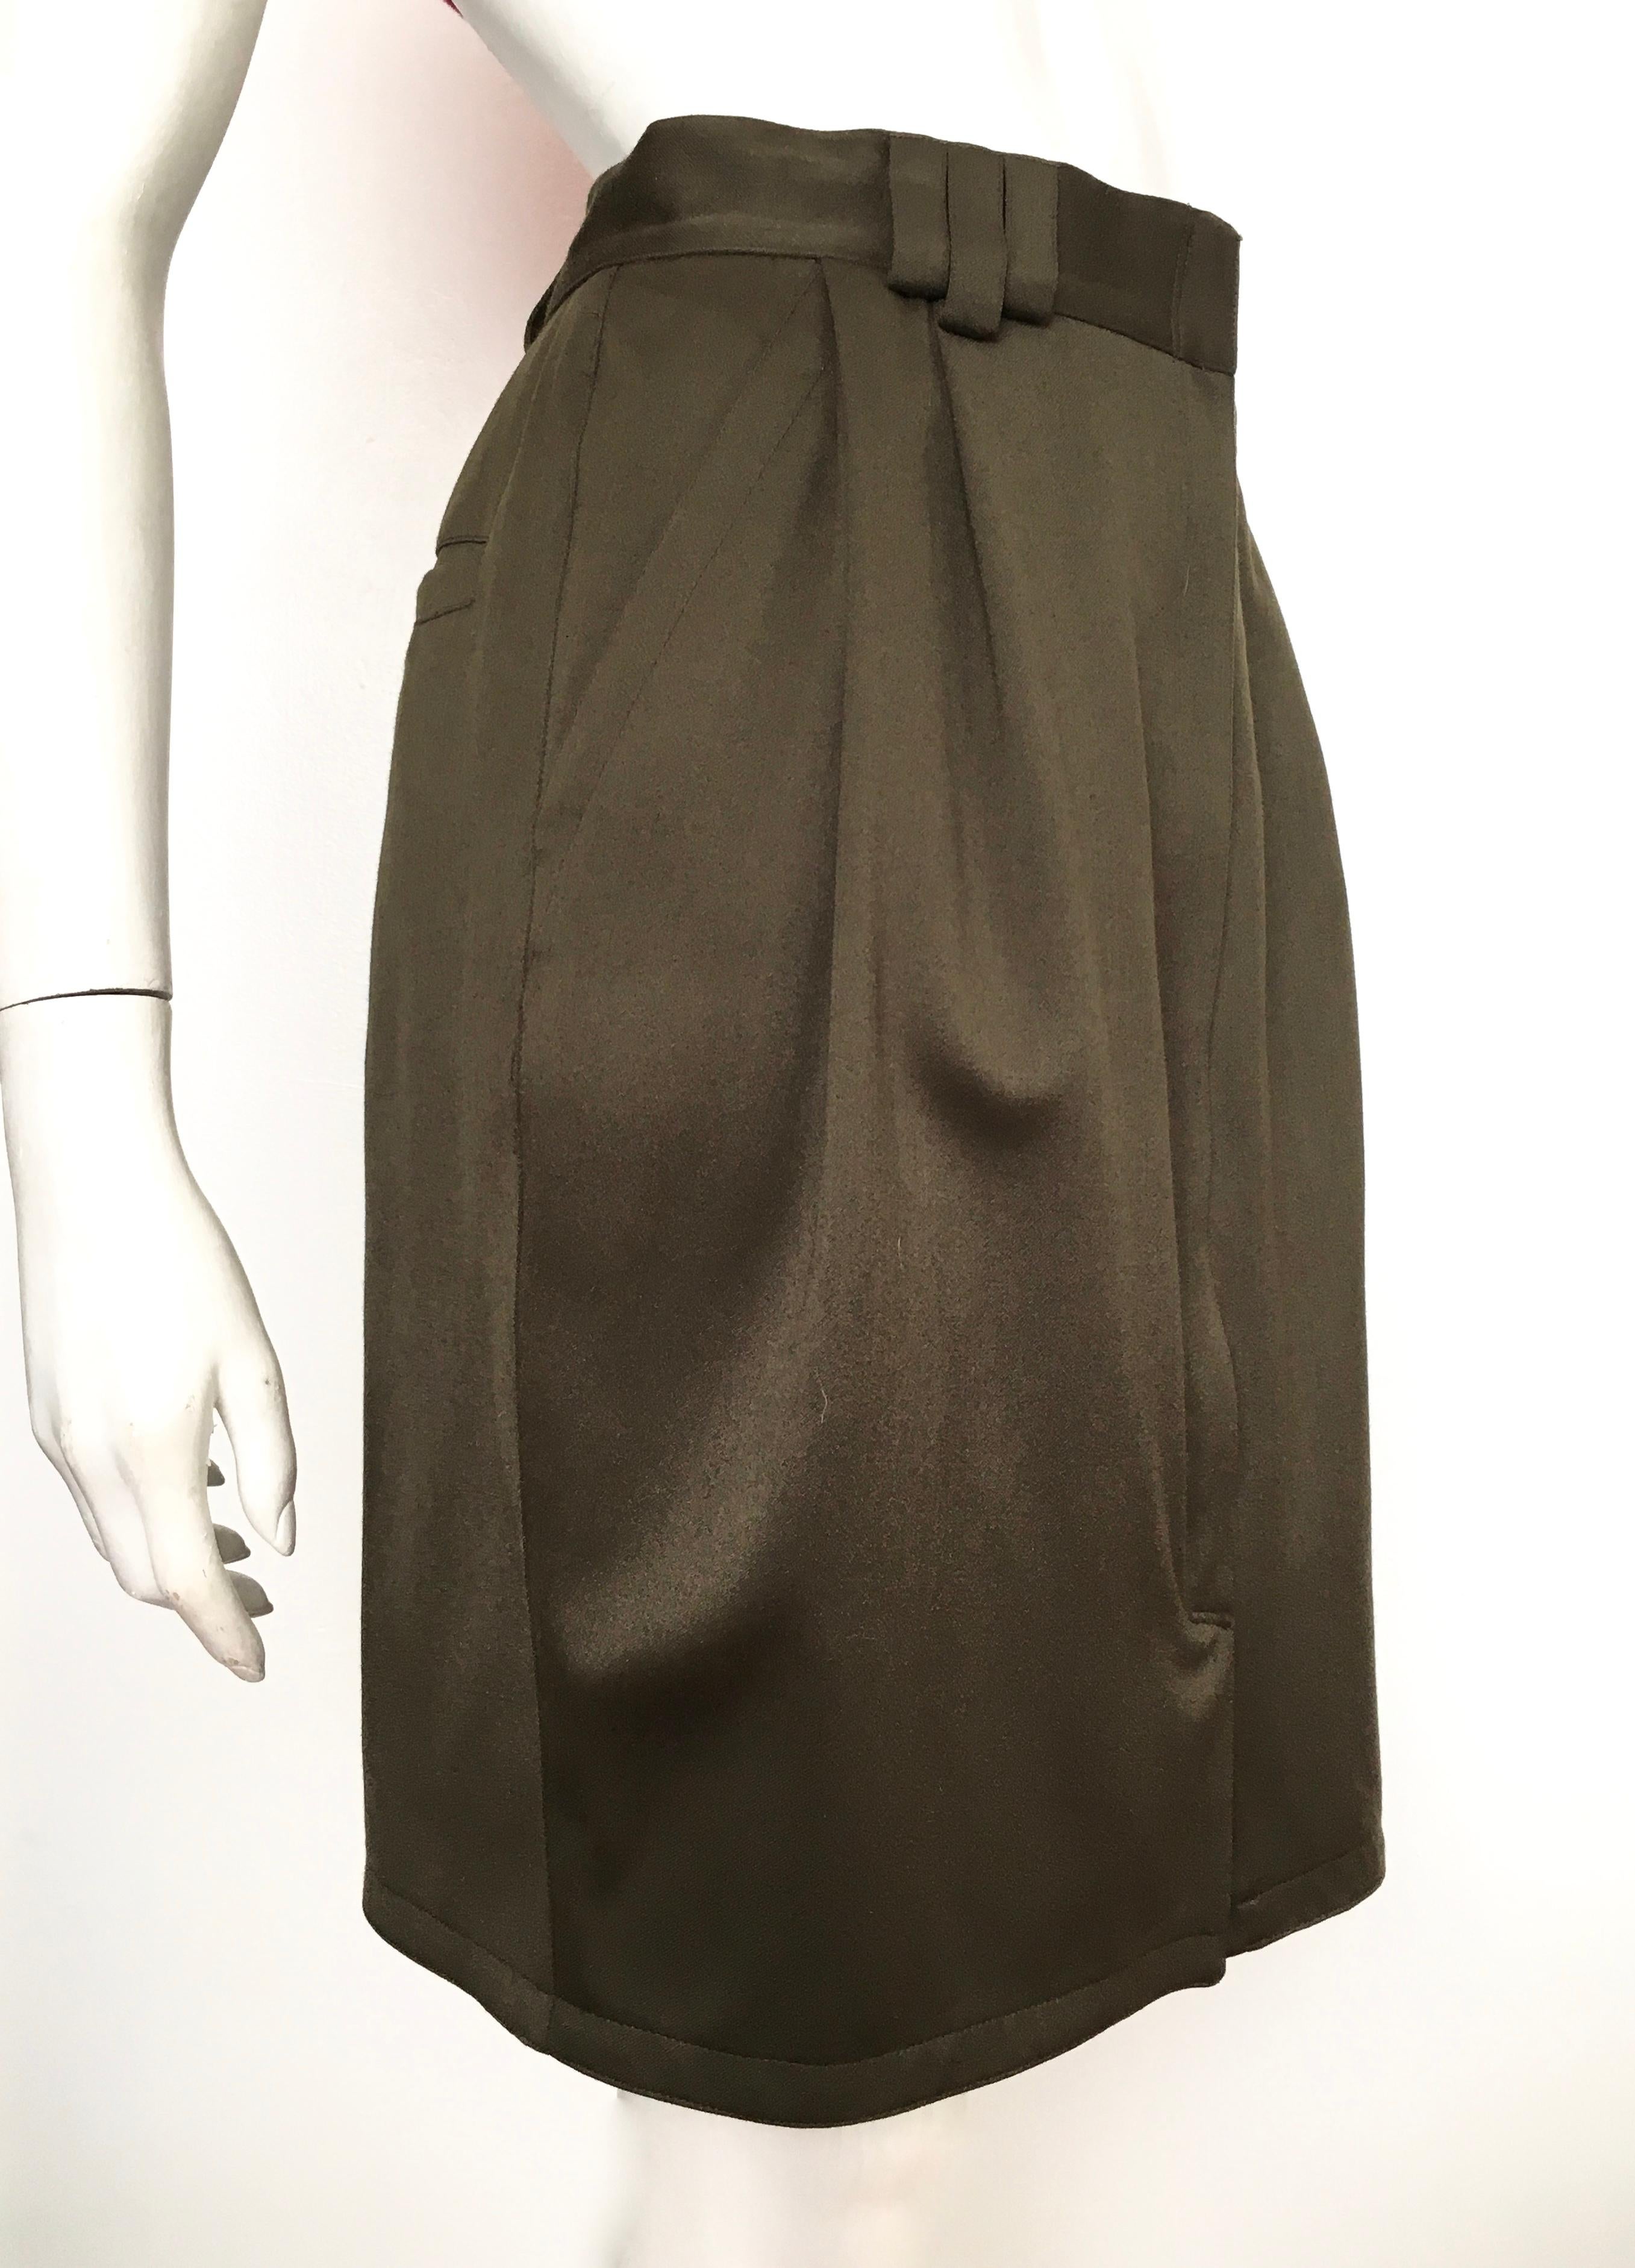 Gianni Versace 1980s olive green wool skirt with pockets is an Italian size 44 and fits a size 6.  The waist is 28. 1/2